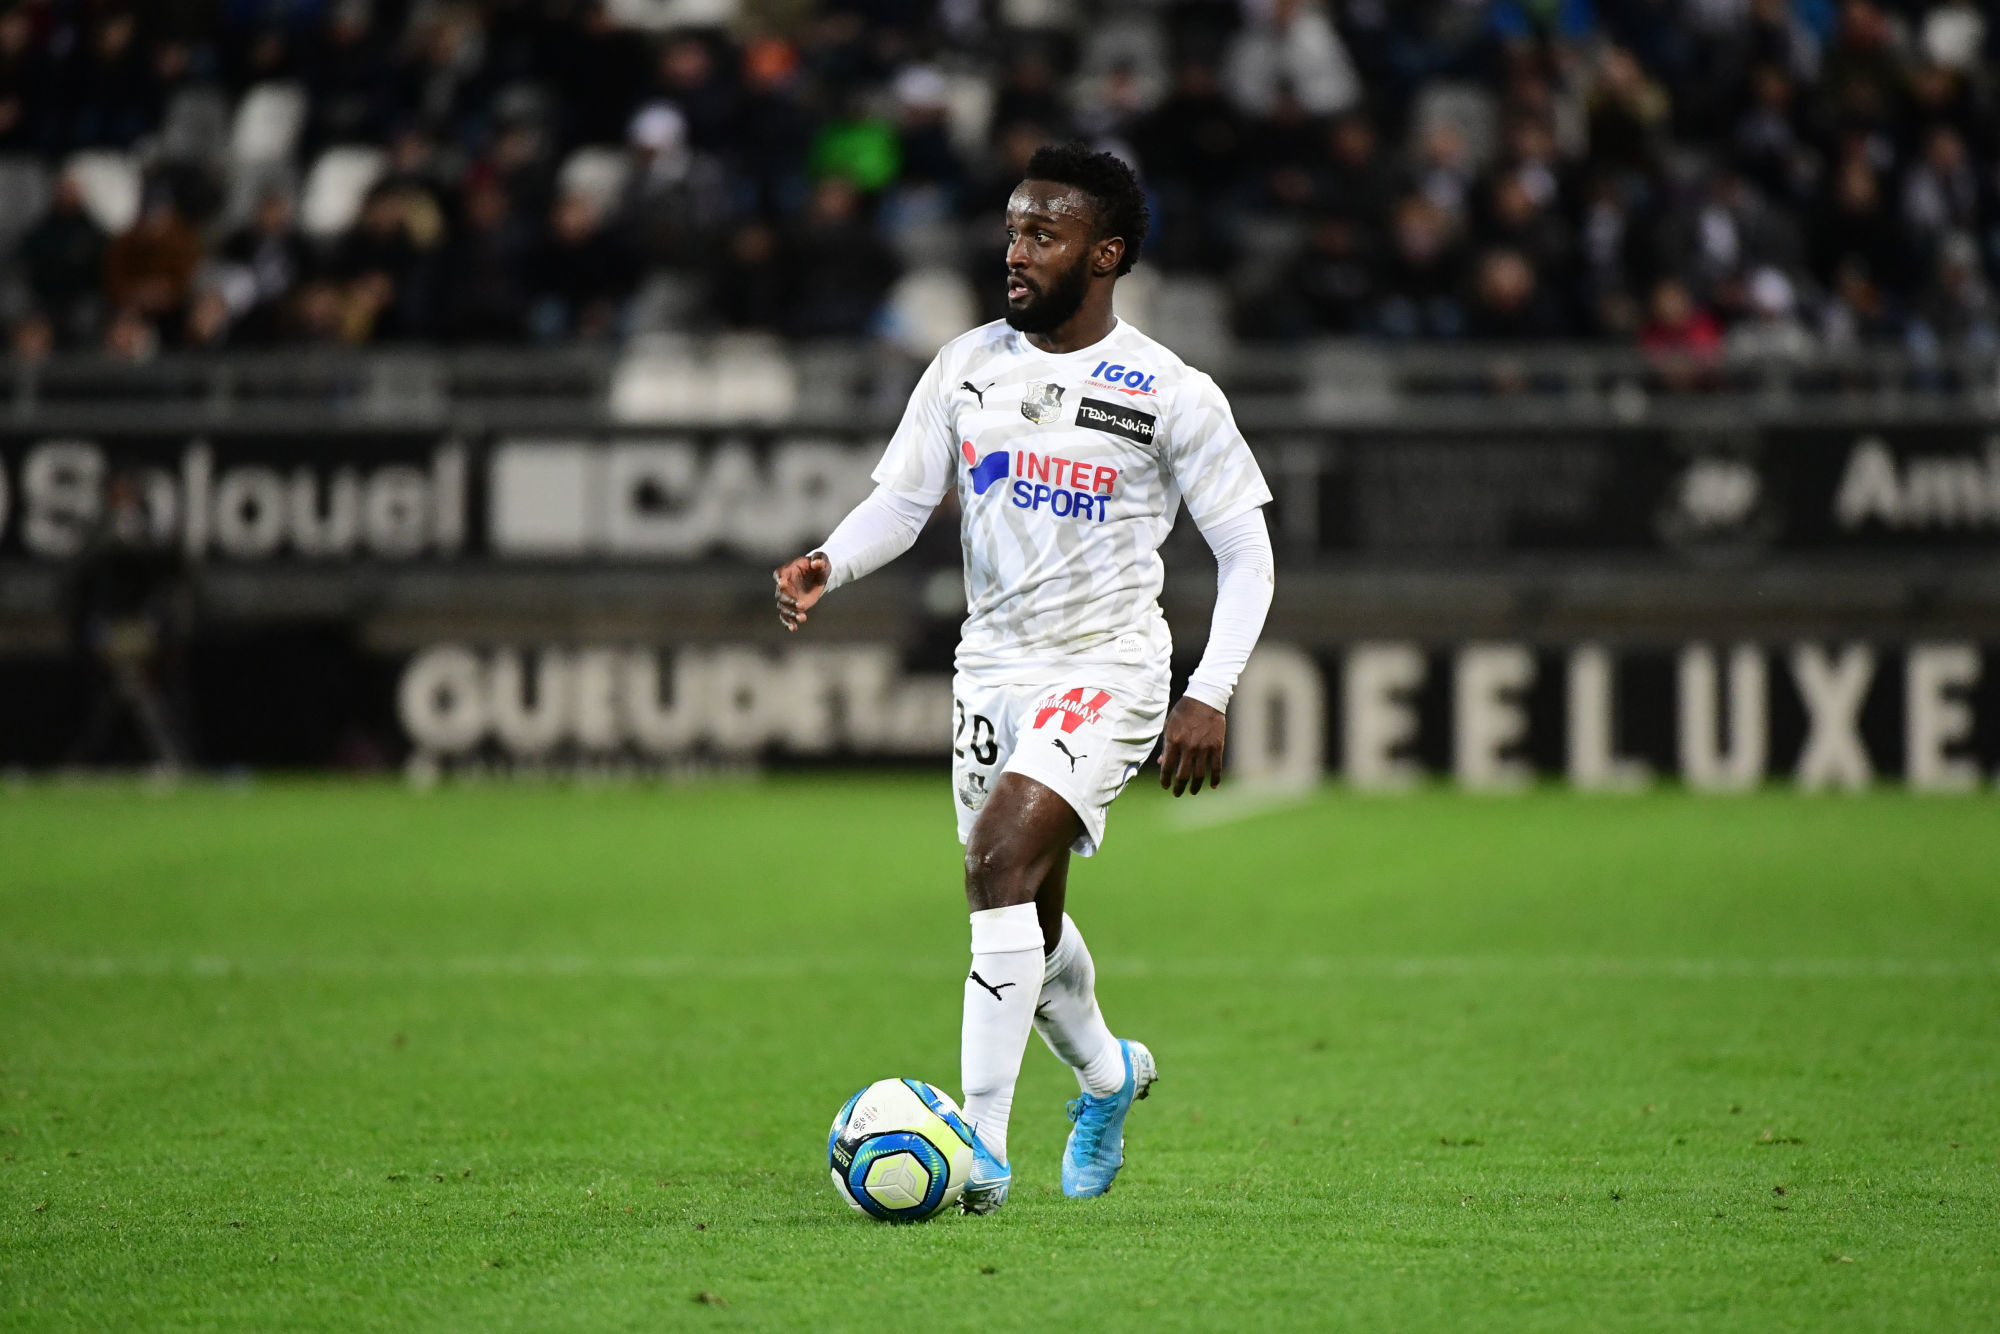 Stiven MENDOZA of Amiens during the Ligue 1 match between Amiens and Dijon at Stade de la Licorne on December 14, 2019 in Amiens, France. (Photo by Dave Winter/Icon Sport) - Stiven MENDOZA - Stade de la Licorne - Amiens (France)